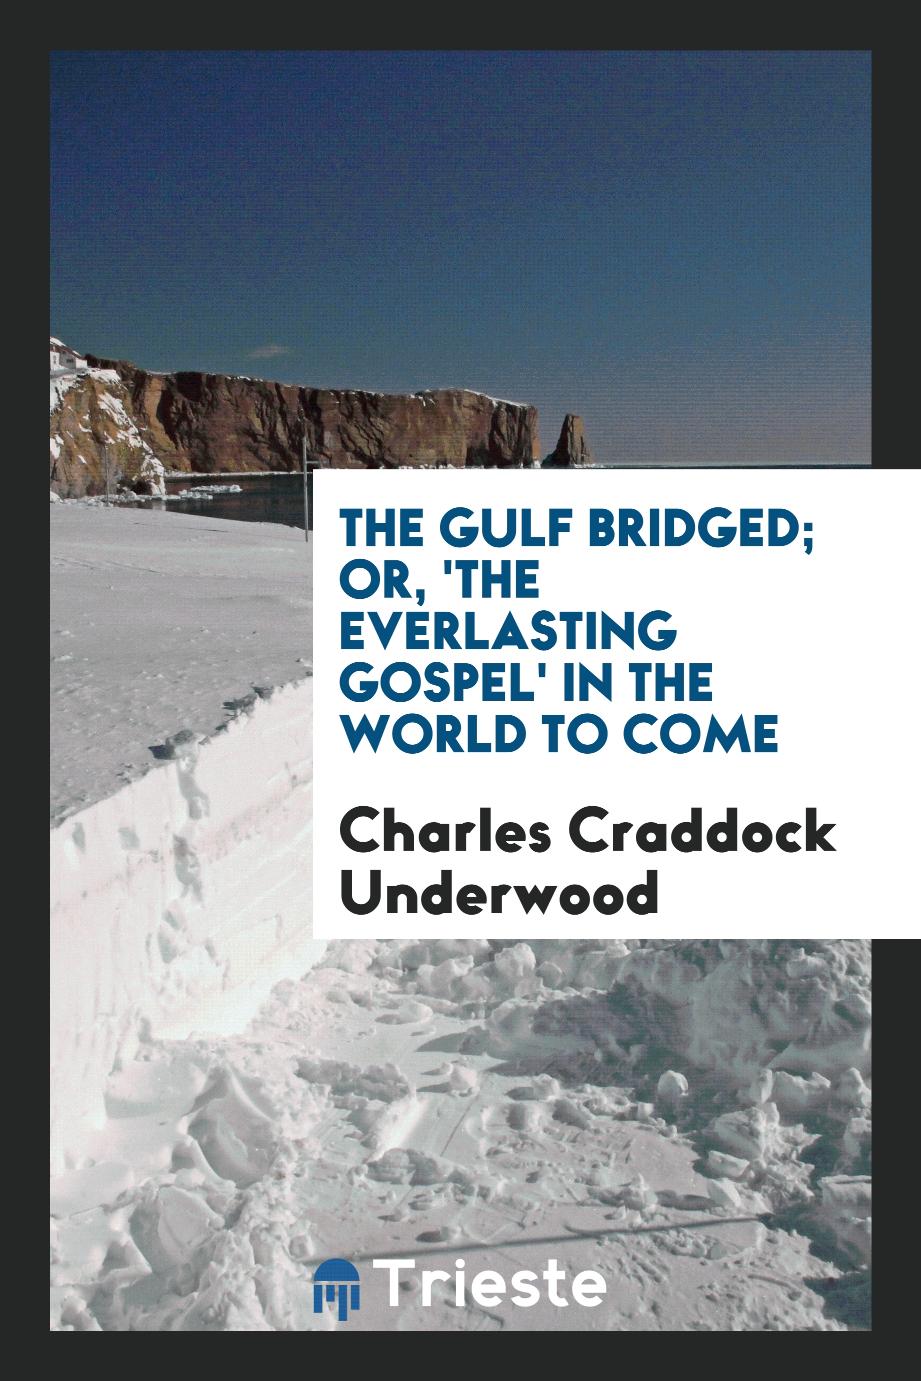 The gulf bridged; or, 'The everlasting gospel' in the world to come